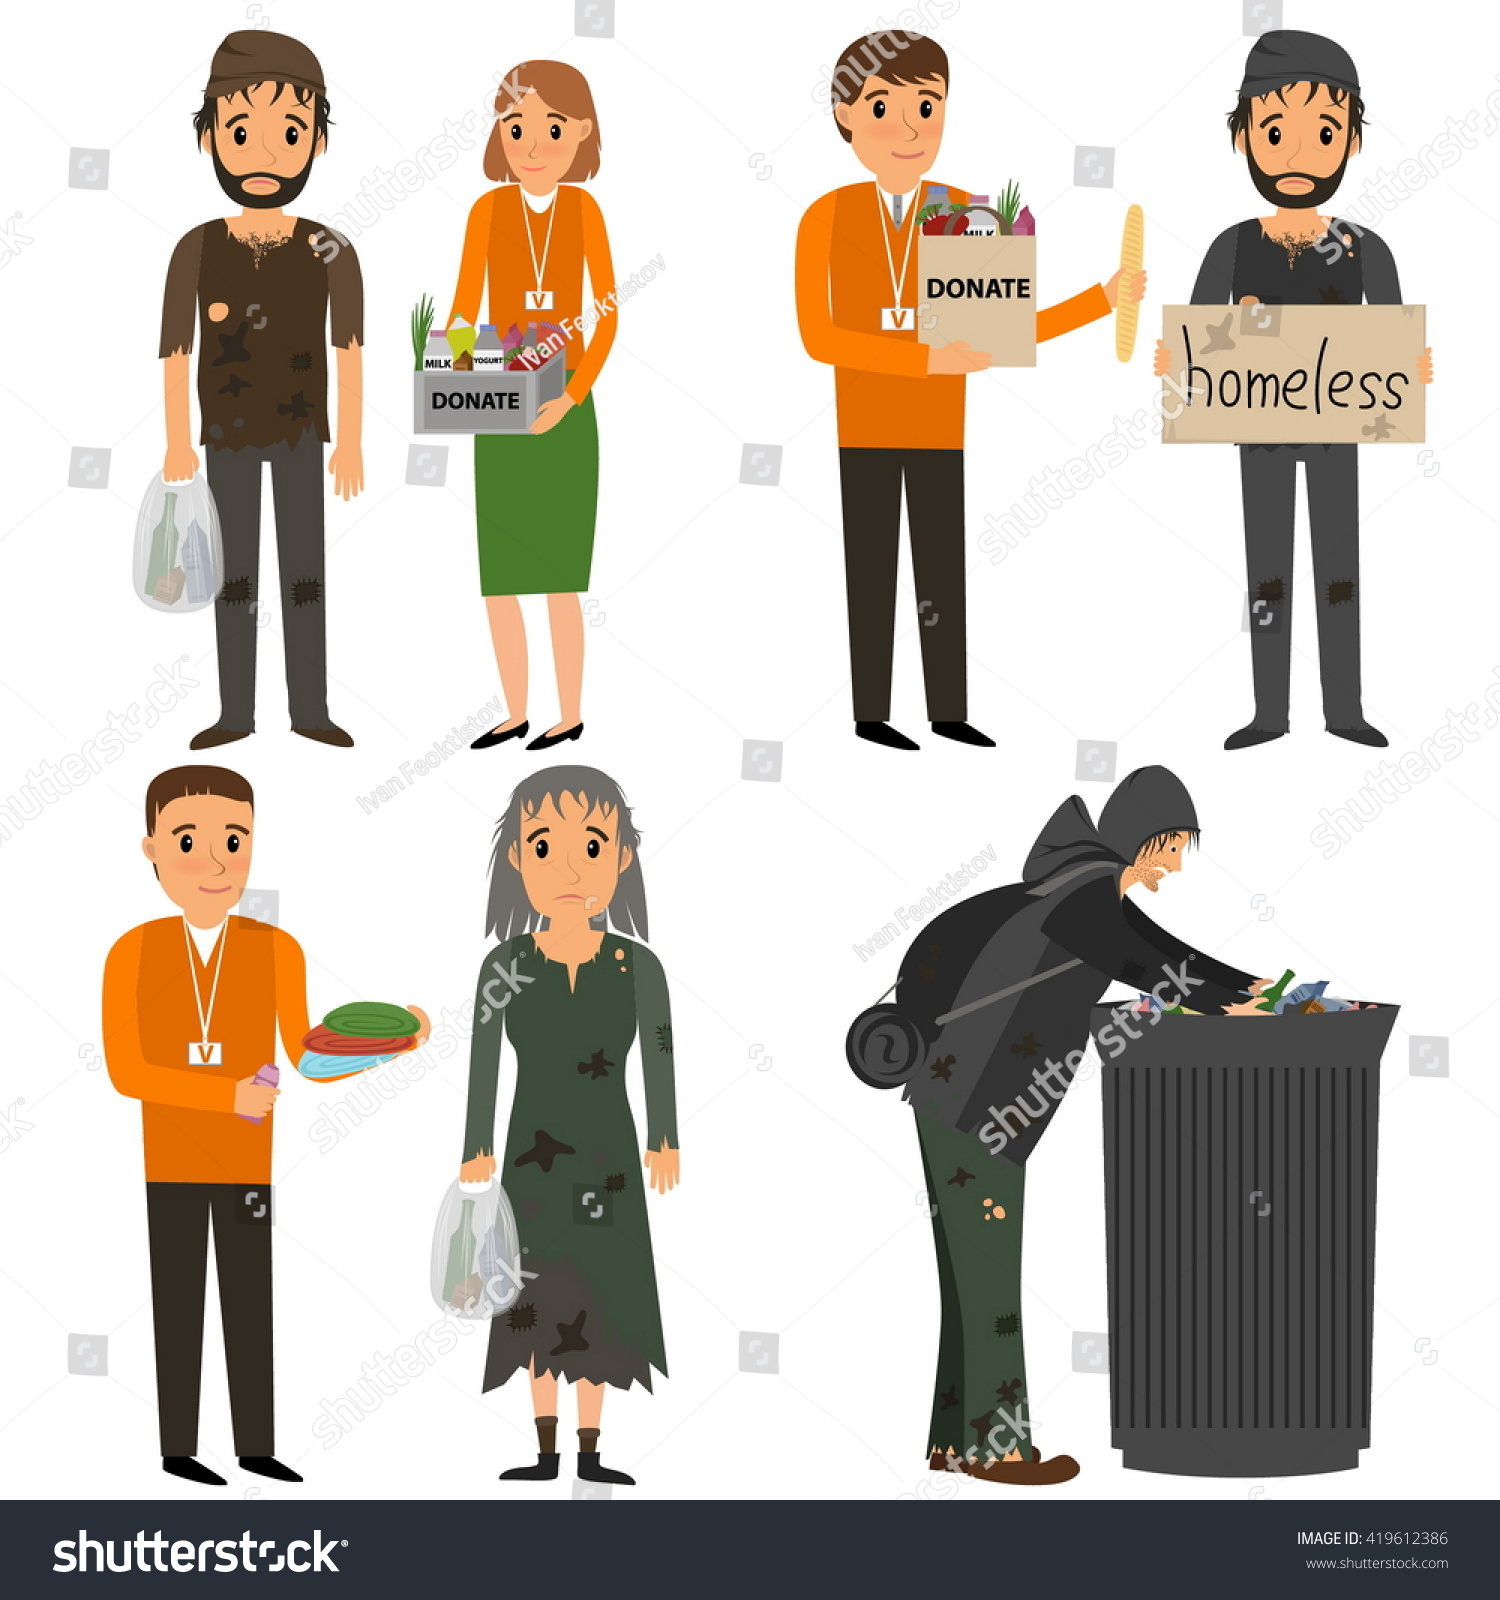 SVG of Volunteer and homeless. Volunteers design concept set with people helping homeless. Vector flat cartoon illustration svg